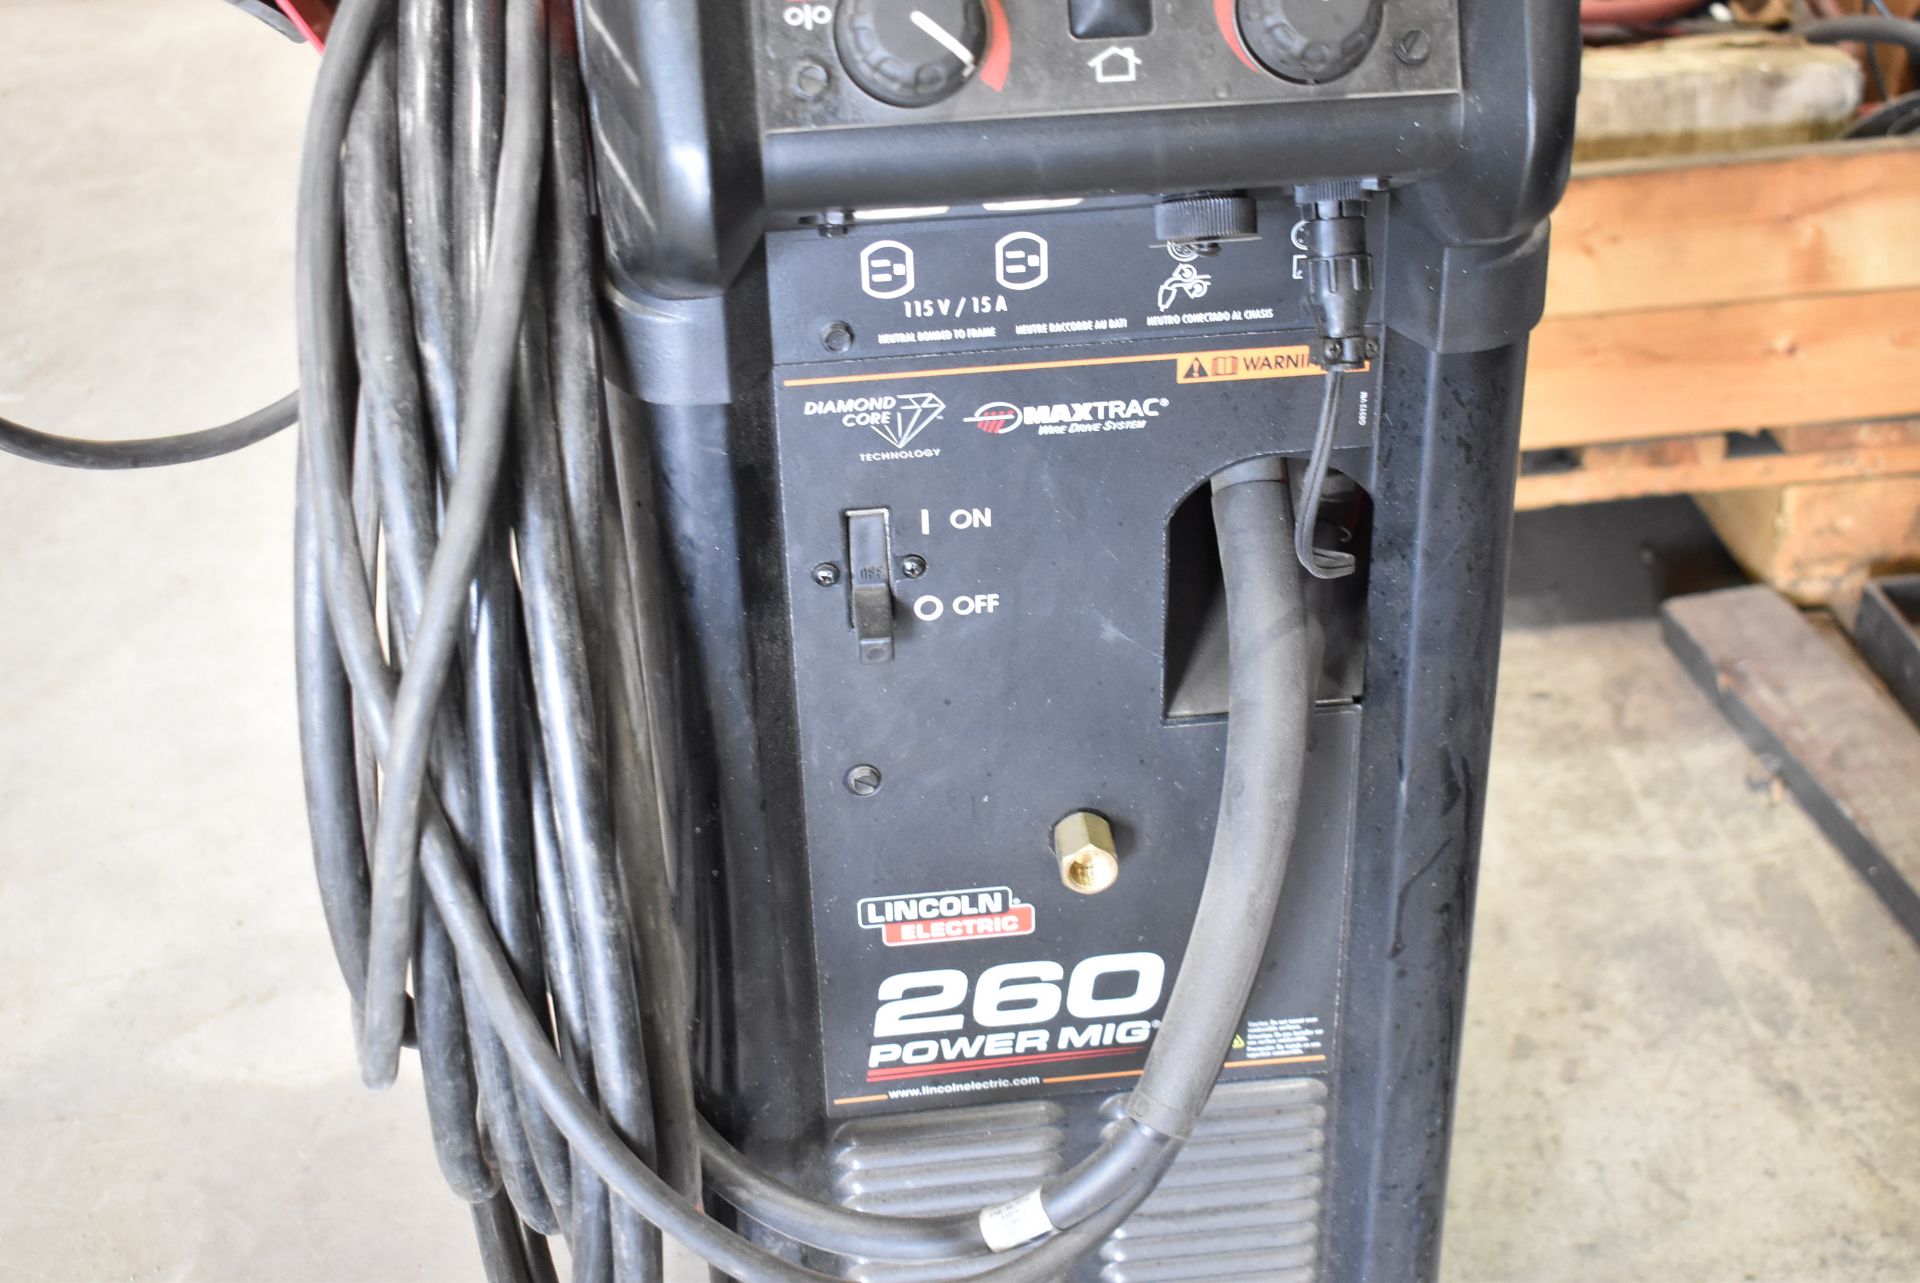 LINCOLN ELECTRIC POWER MIG 260 PORTABLE MIG WELDER WITH DIGITAL CONTROL, MAXTRAC WIRE DRIVE - Image 4 of 5